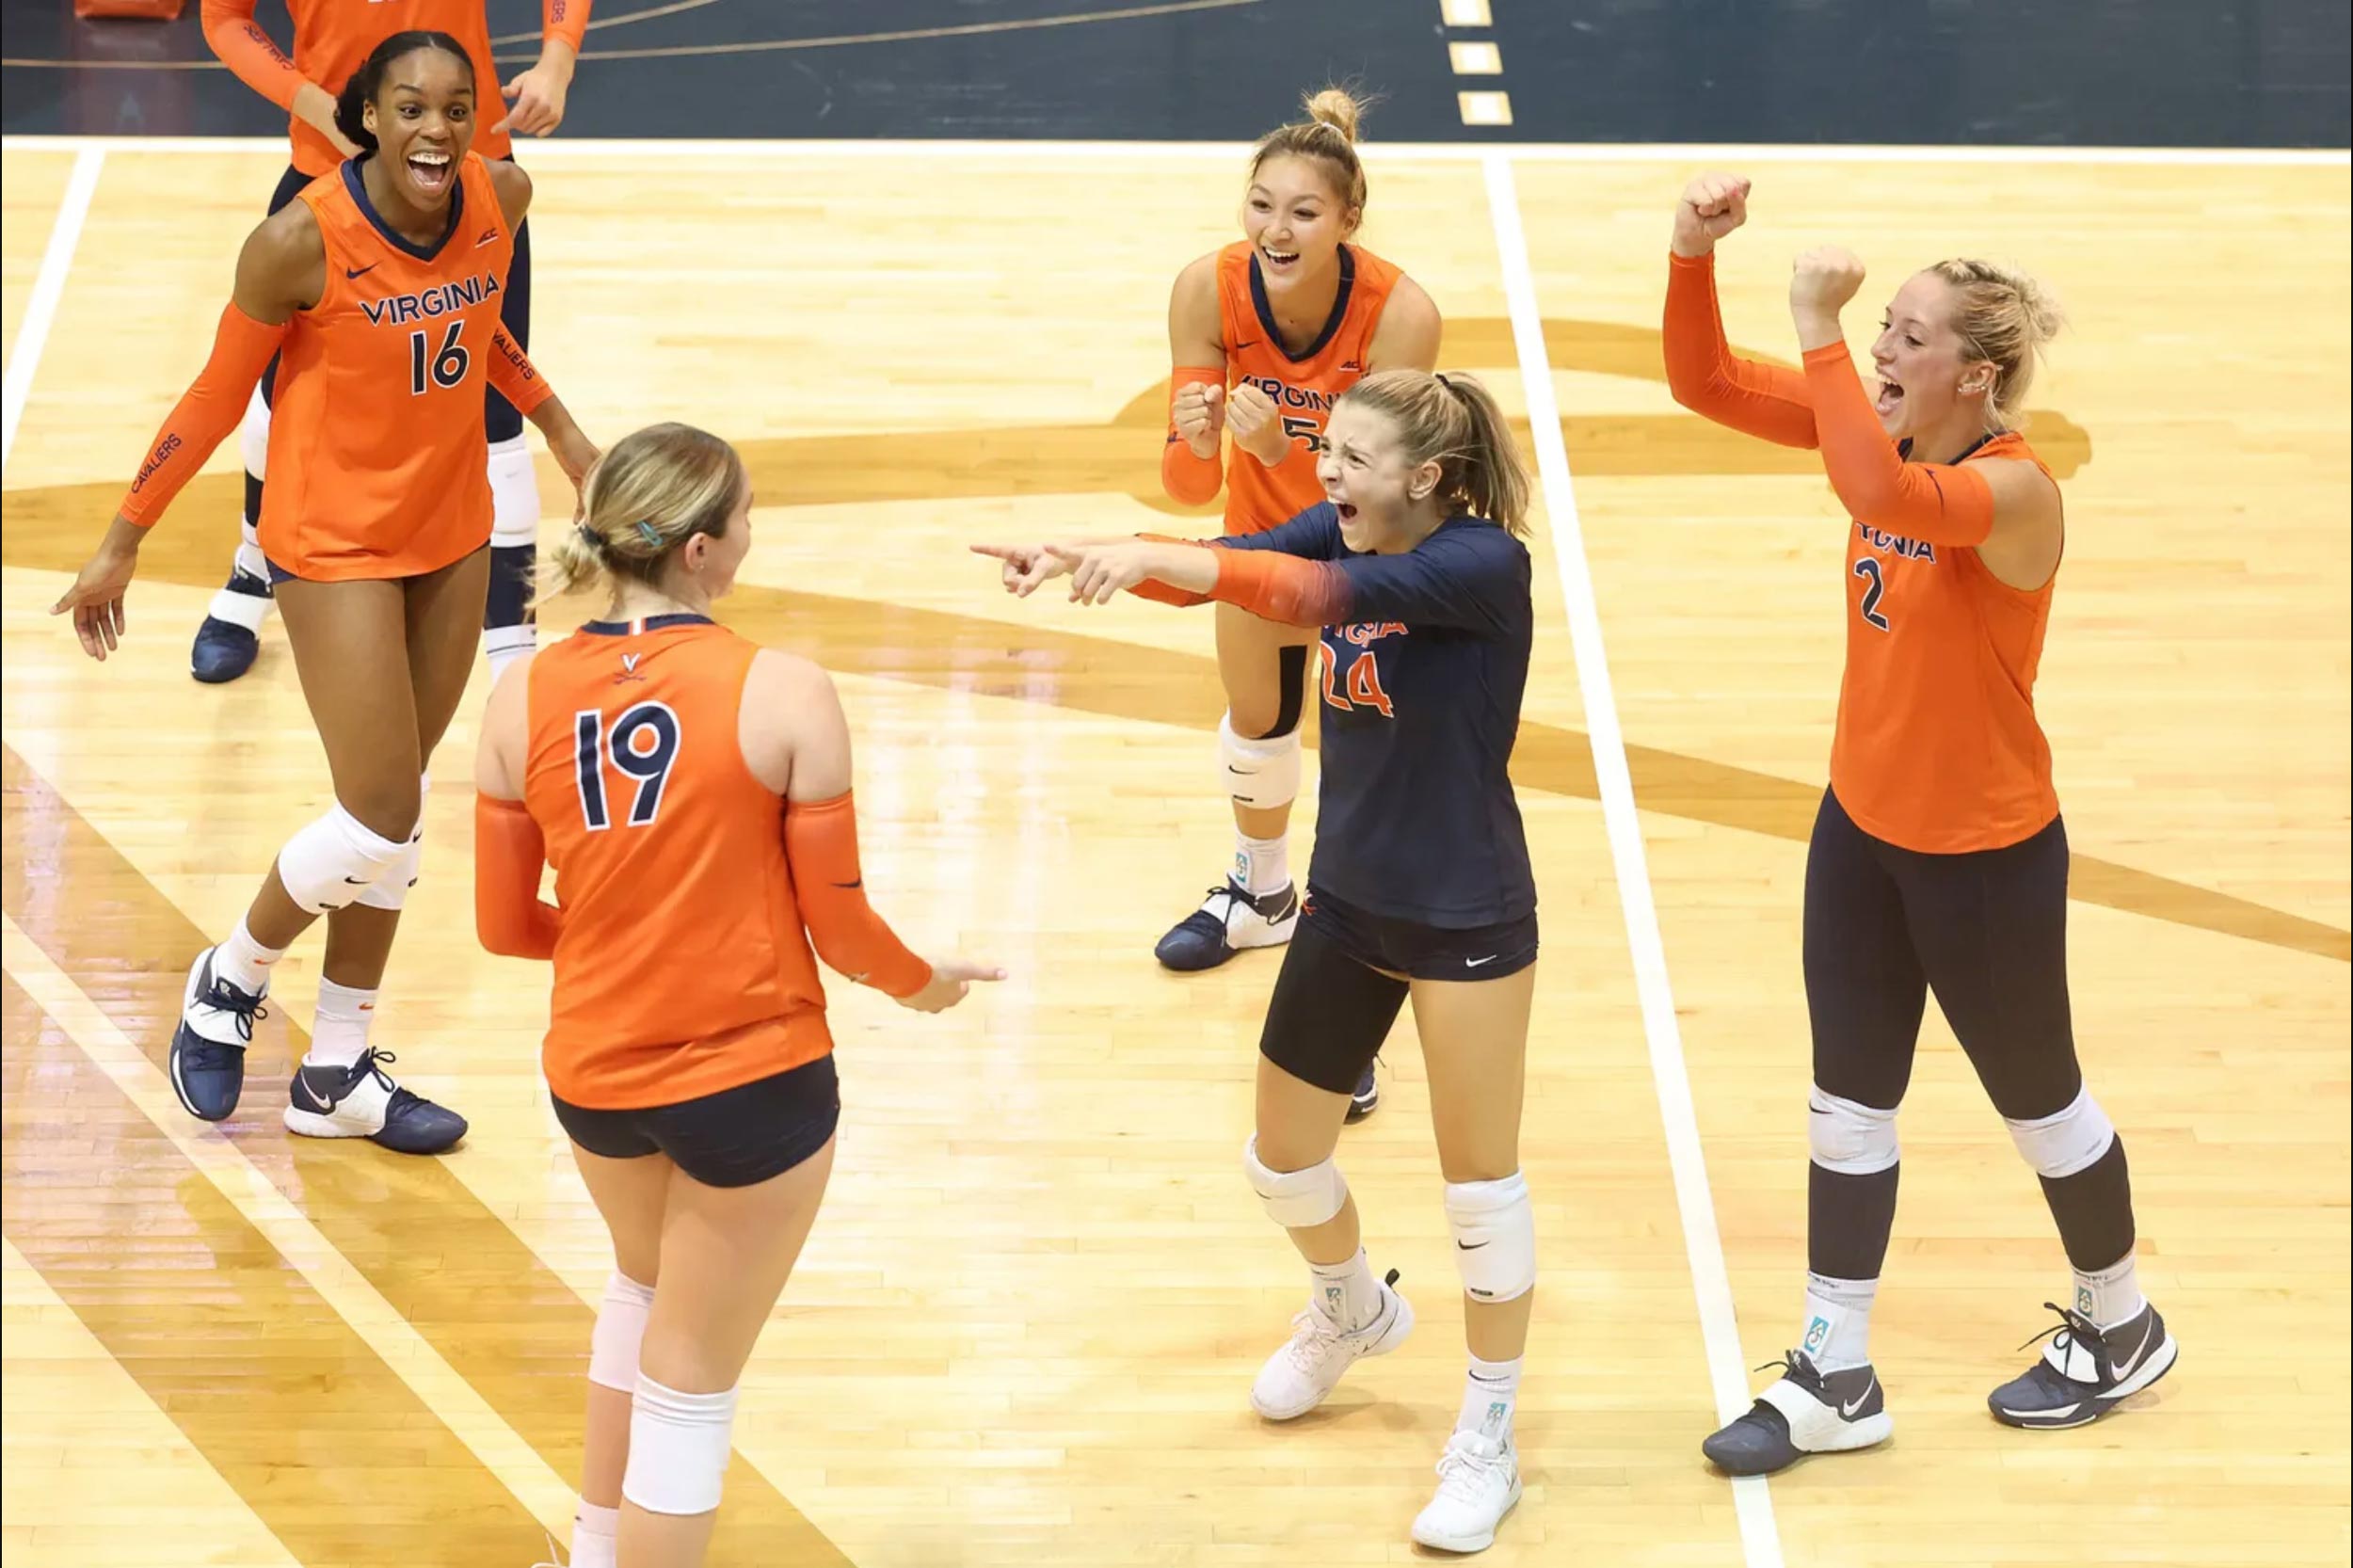 UVA volleyball players on the court celebrating